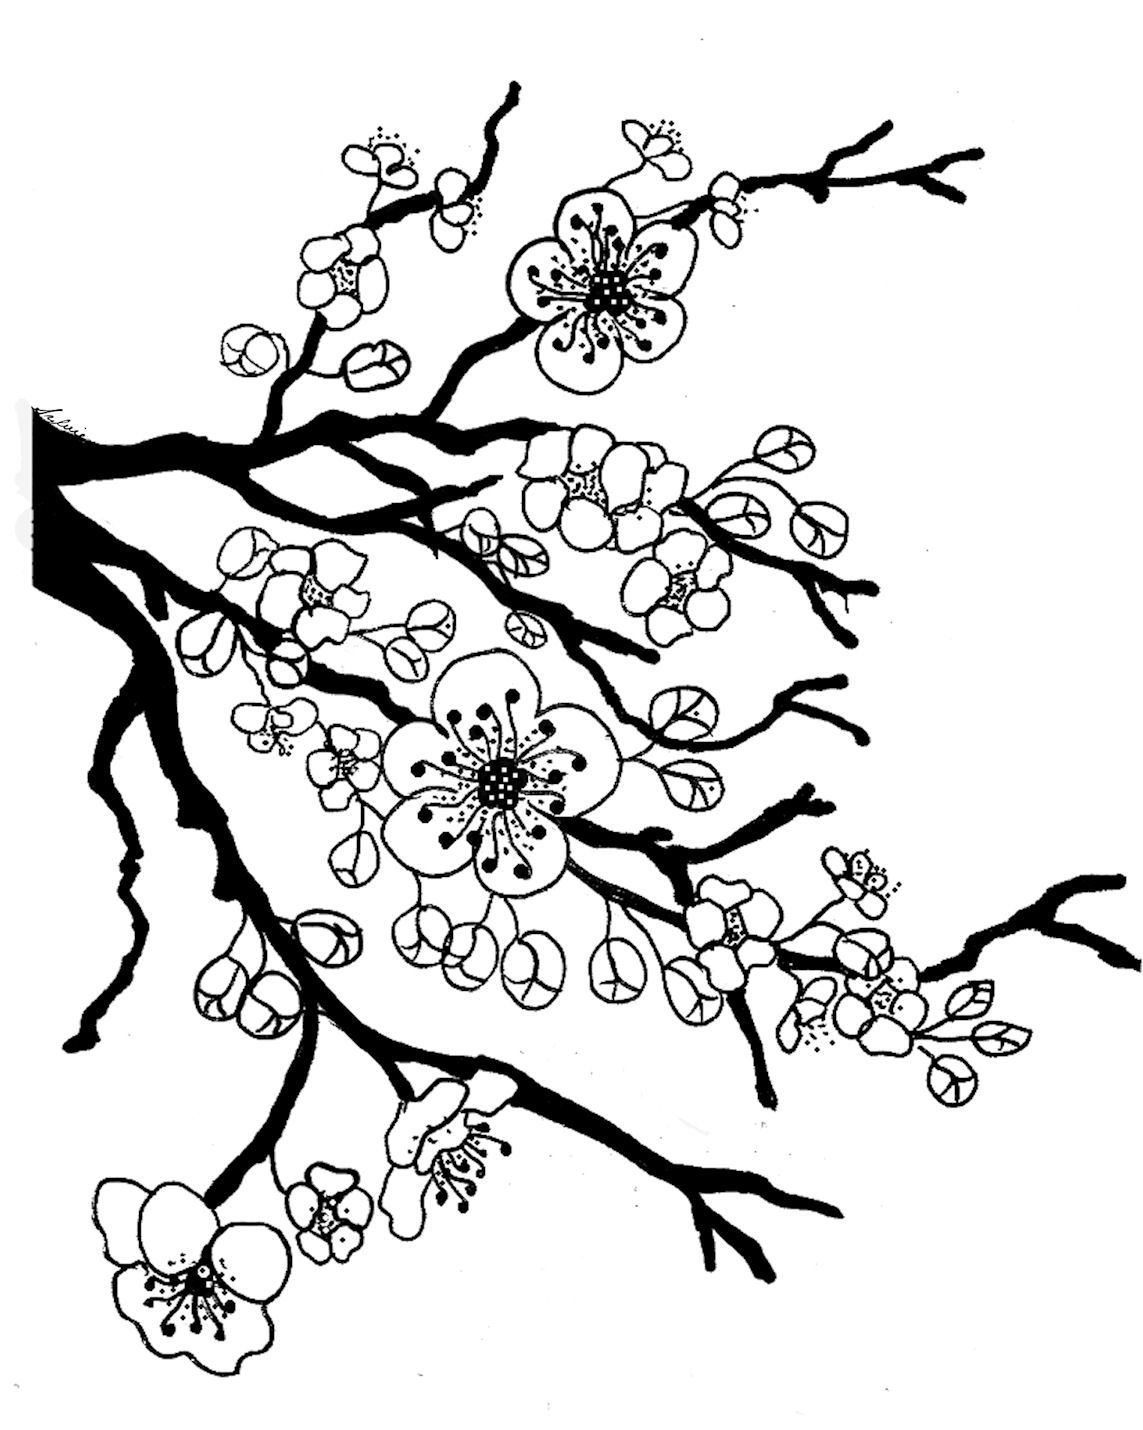 Cherry Blossom Coloring Pages - ClipArt Best